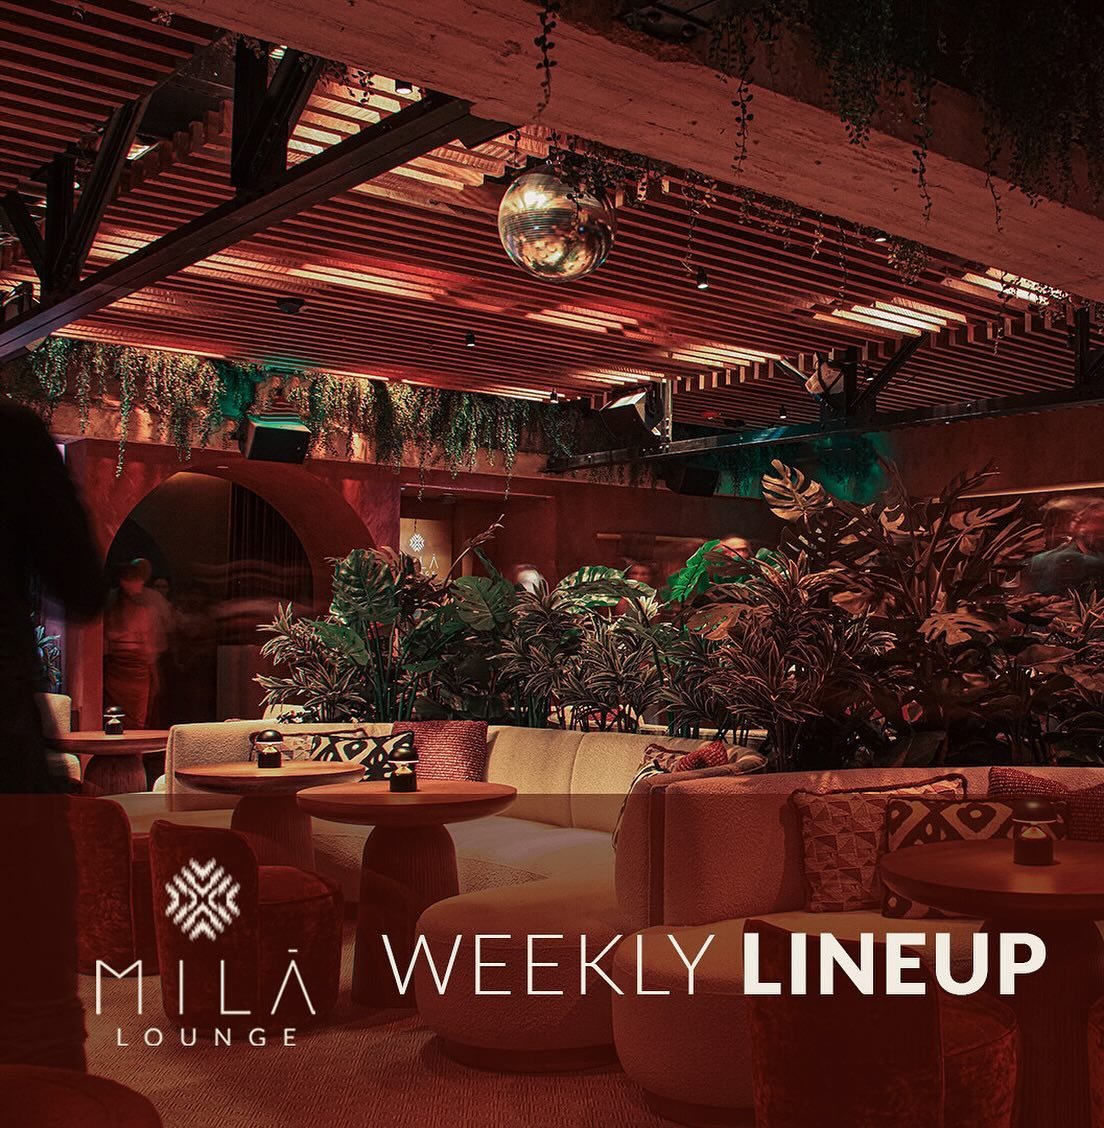 Step into the pulse of the night this week at #MILAlounge. Join us for nights filled with dynamic rhythm and flow. Reserve your table now: reservations@milalounge.com